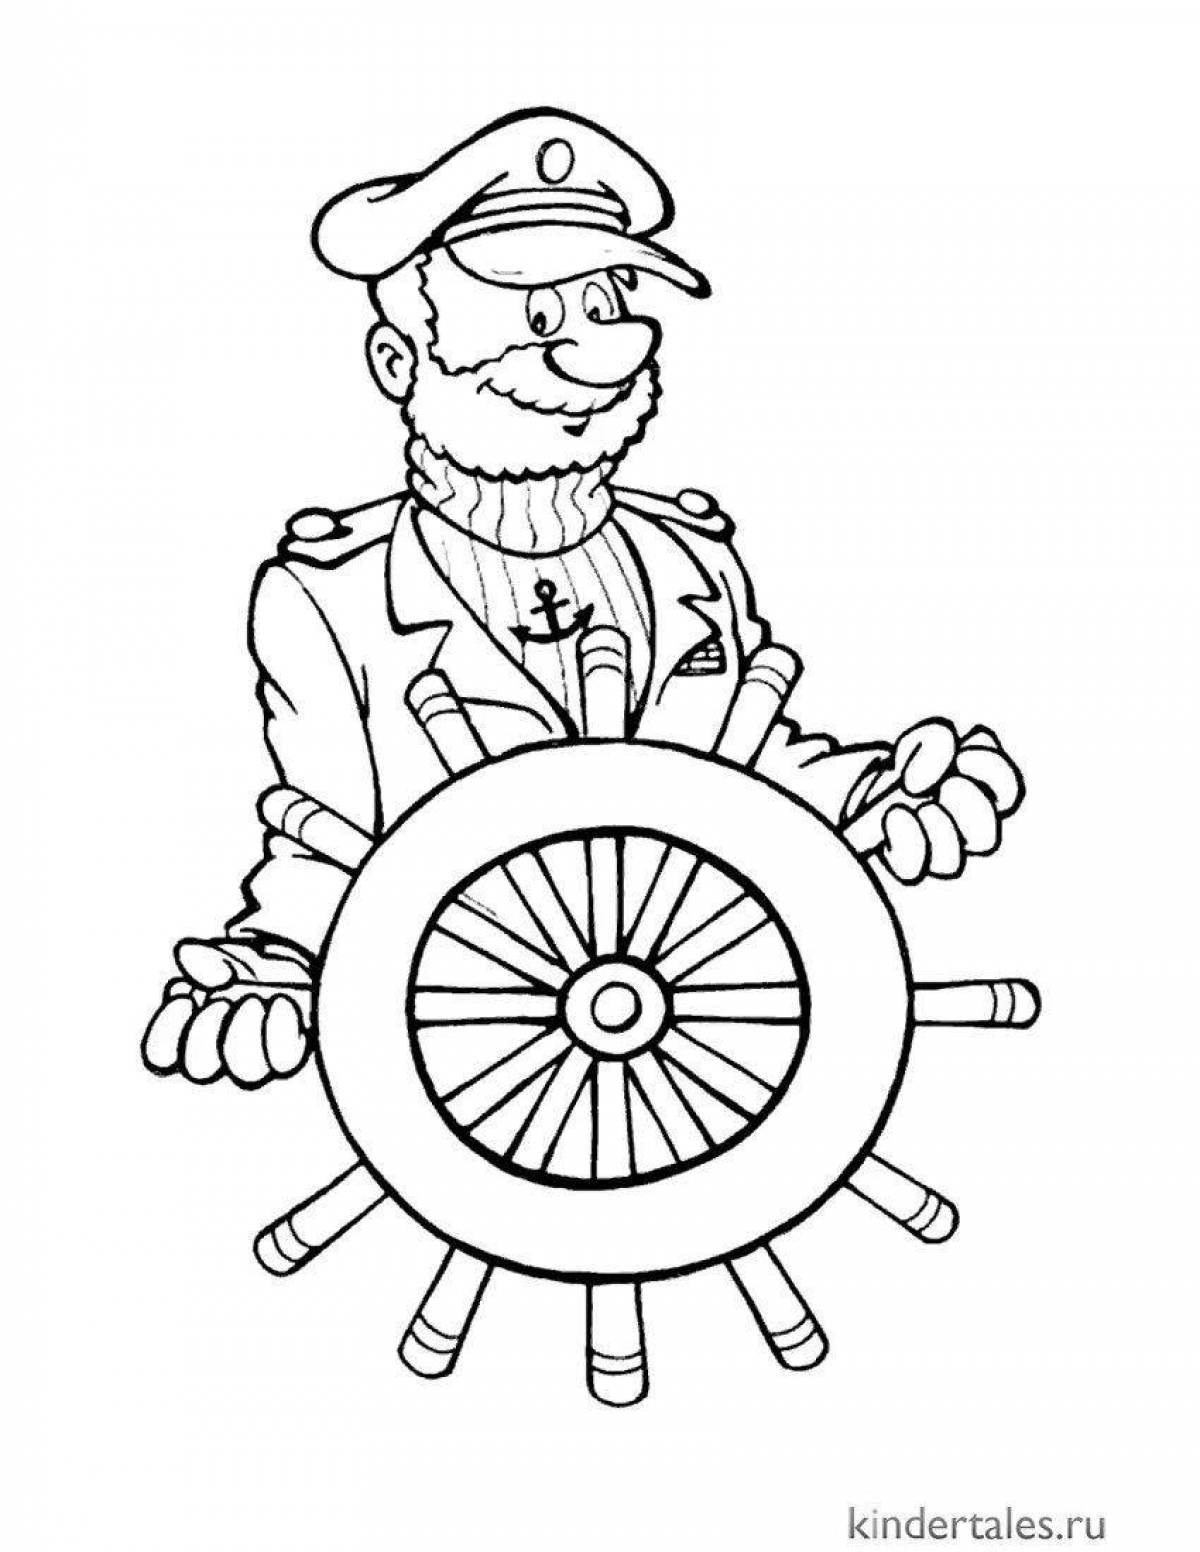 Animated sailor coloring book